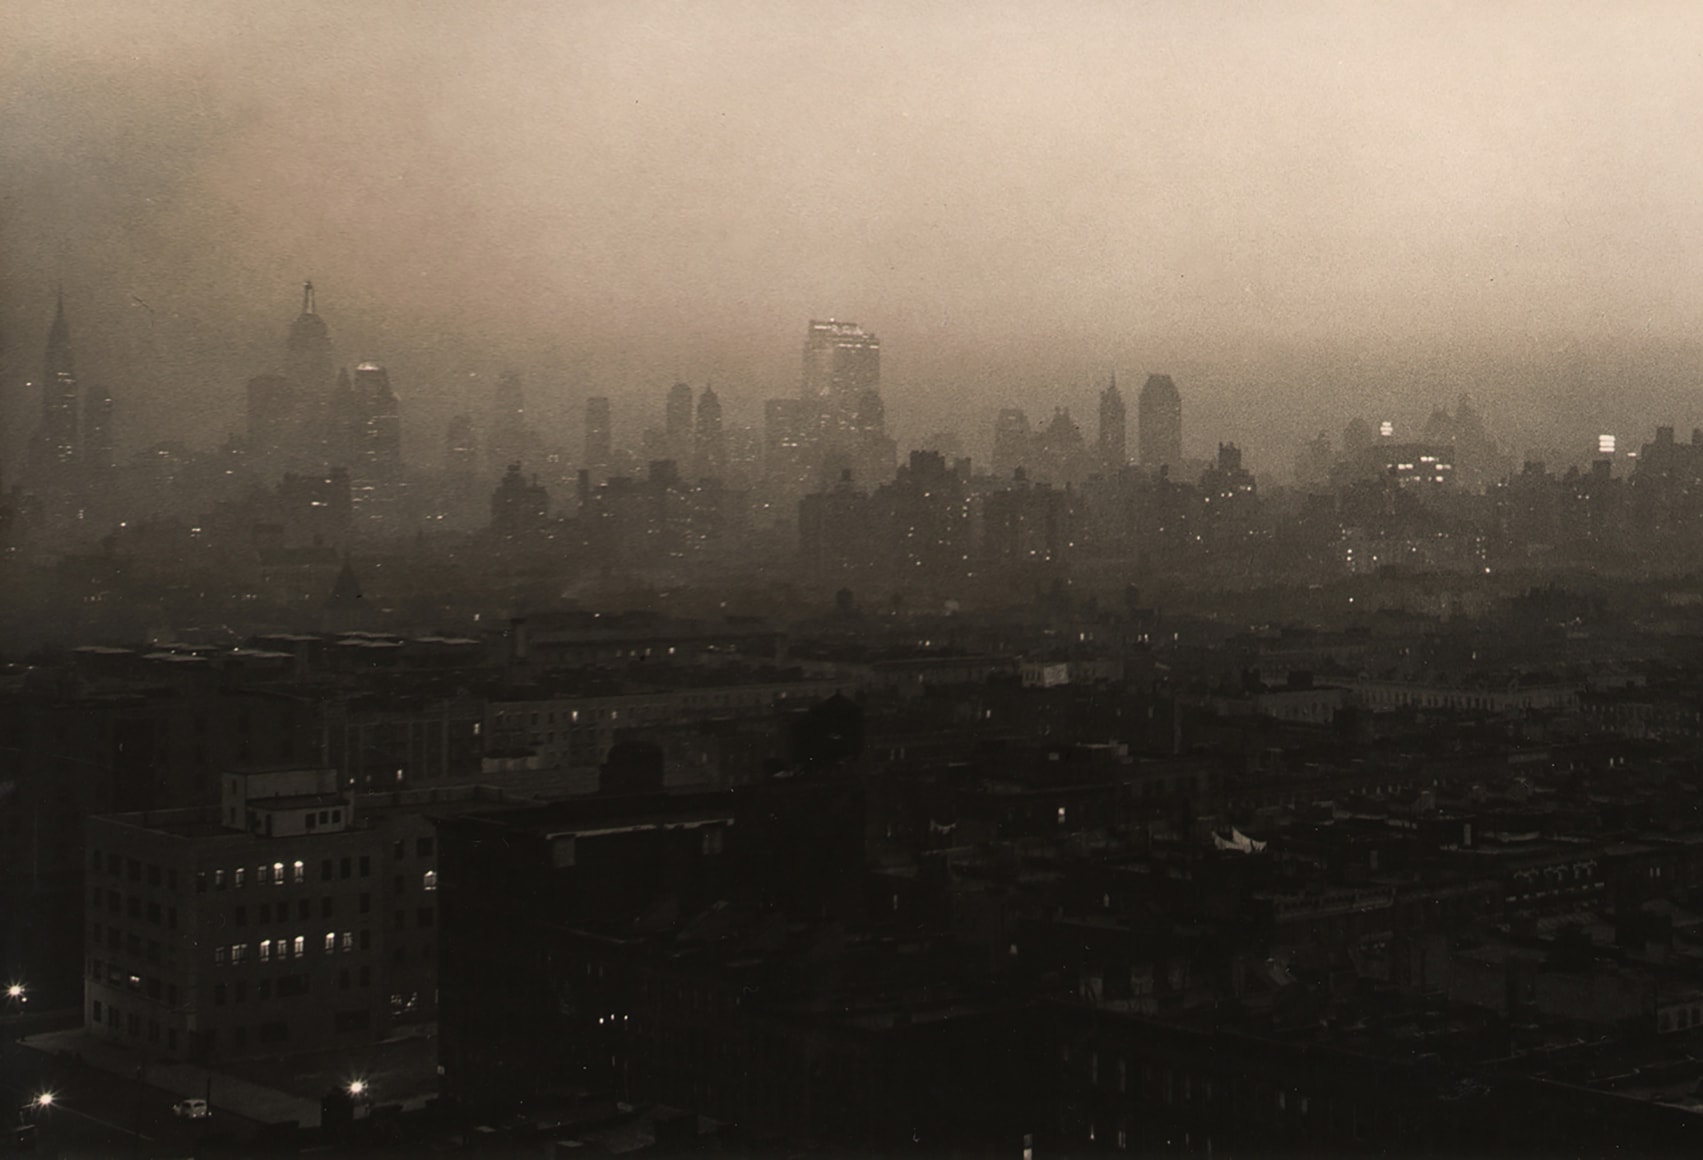 Paul J. Woolf, New York Skyline Evening Haze, ​c. 1936. Dark and hazy cityscape with skyscrapers in the distance silhouetted across the frame.